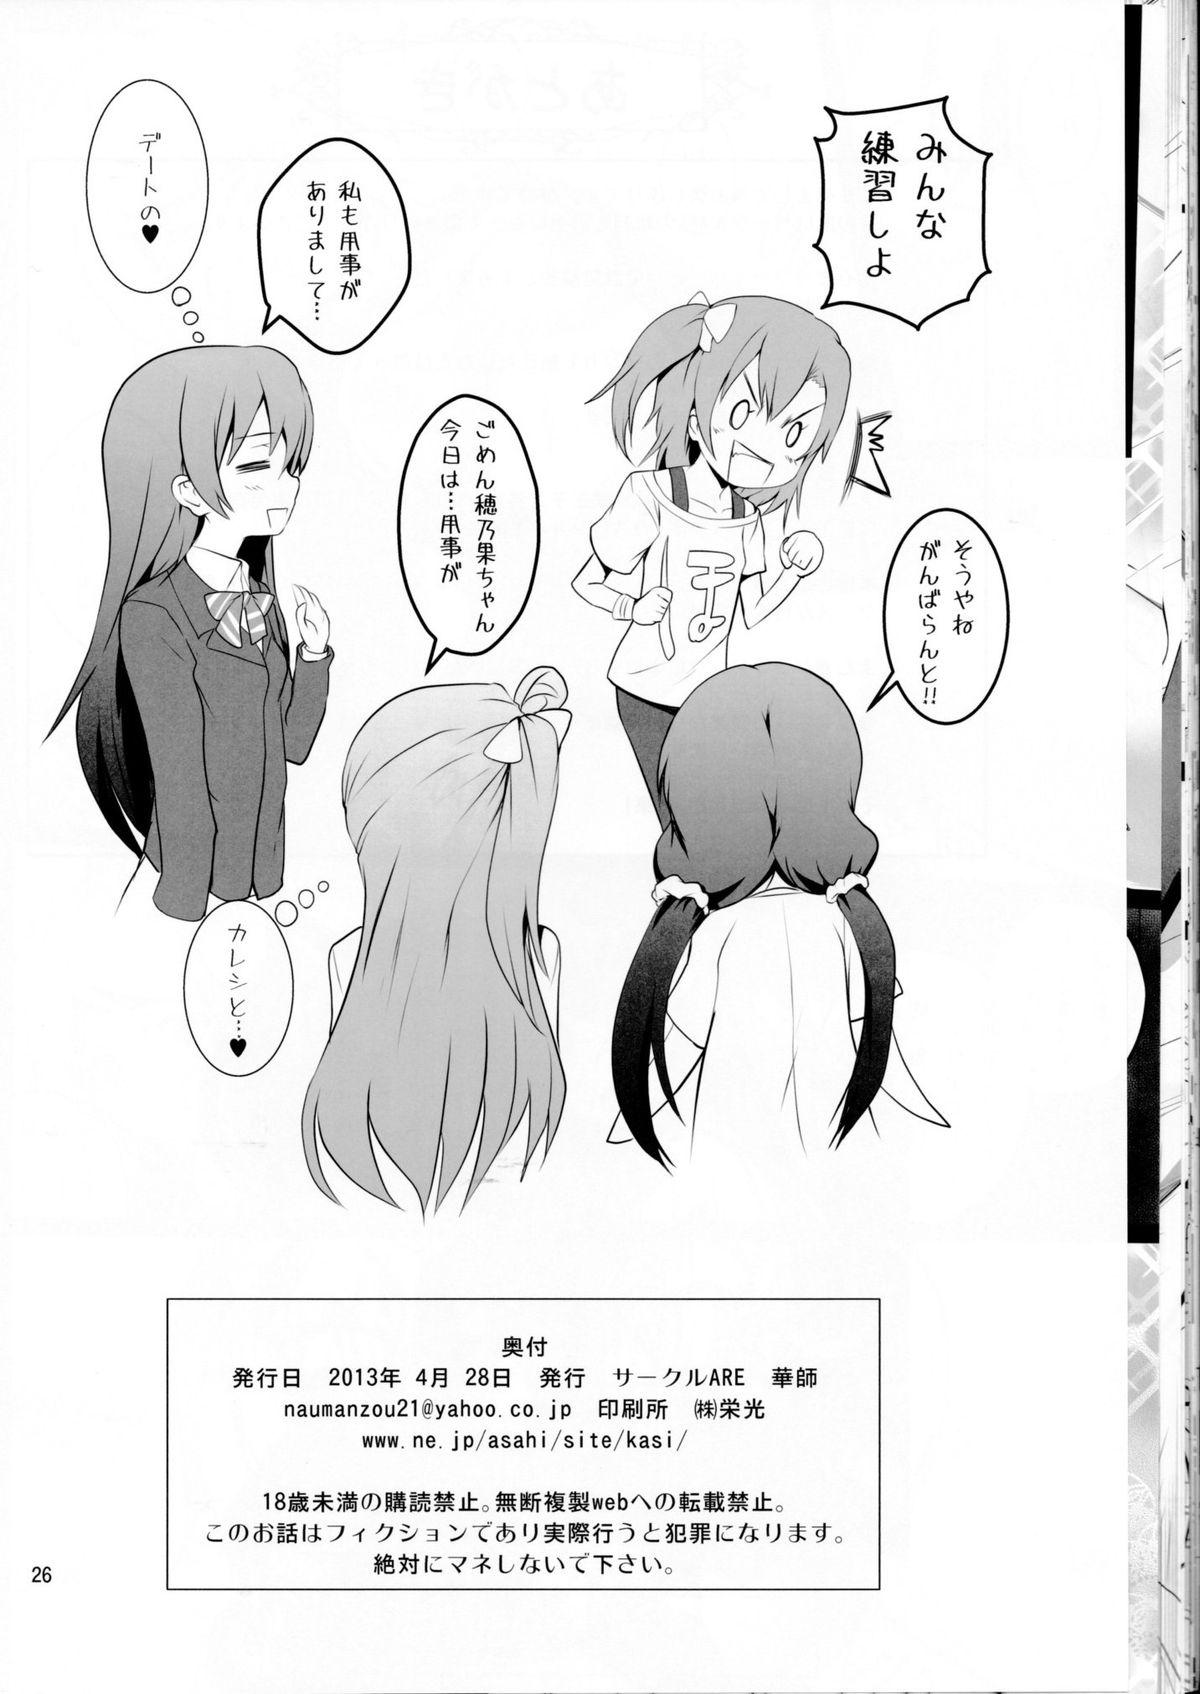 Nudes BiBittored Operation - Love live Girl Girl - Page 25